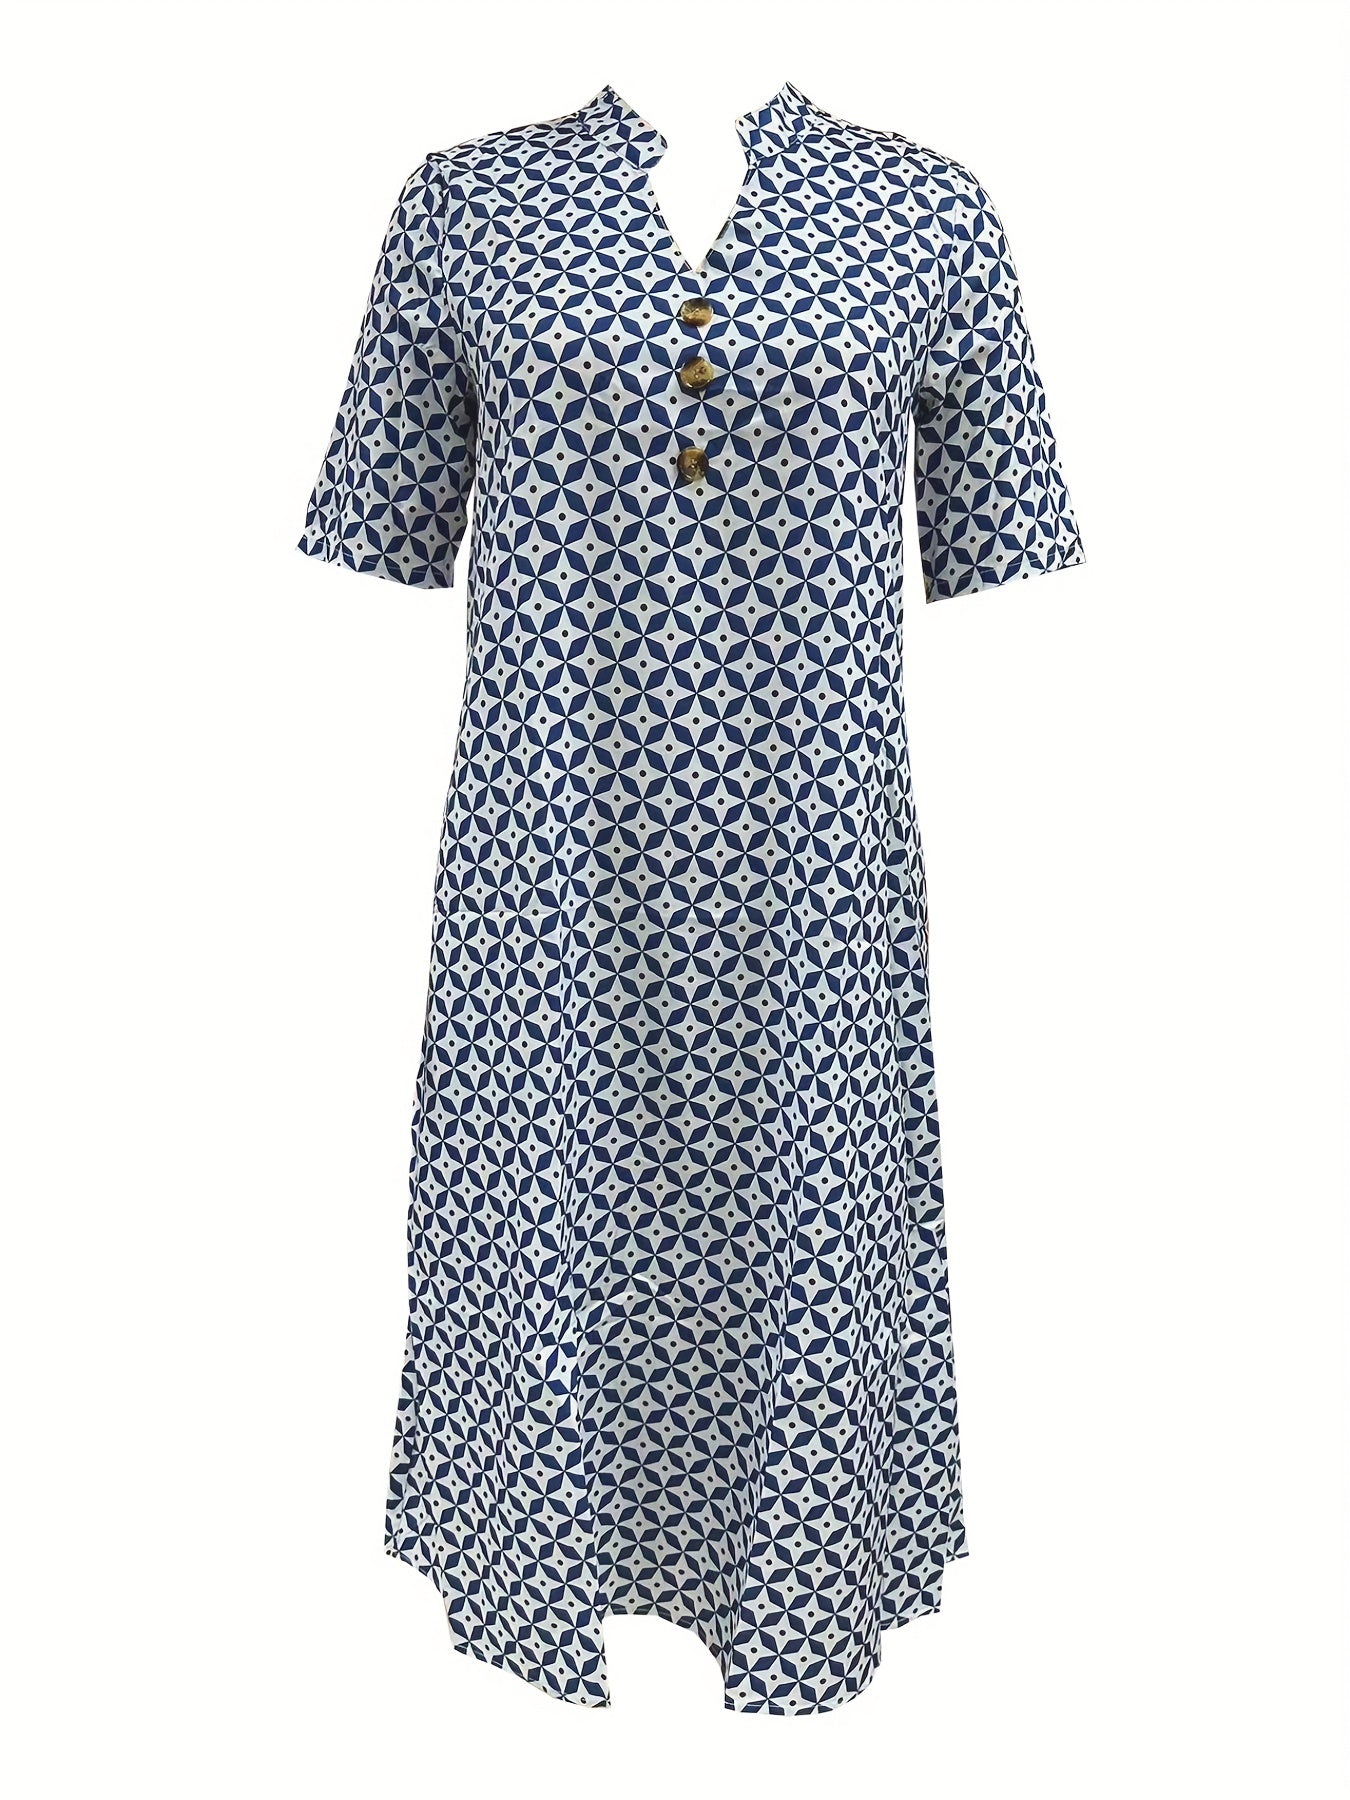 「lovevop」Allover Print Button Front Dress, Casual Short Sleeve Dress For Spring & Summer, Women's Clothing